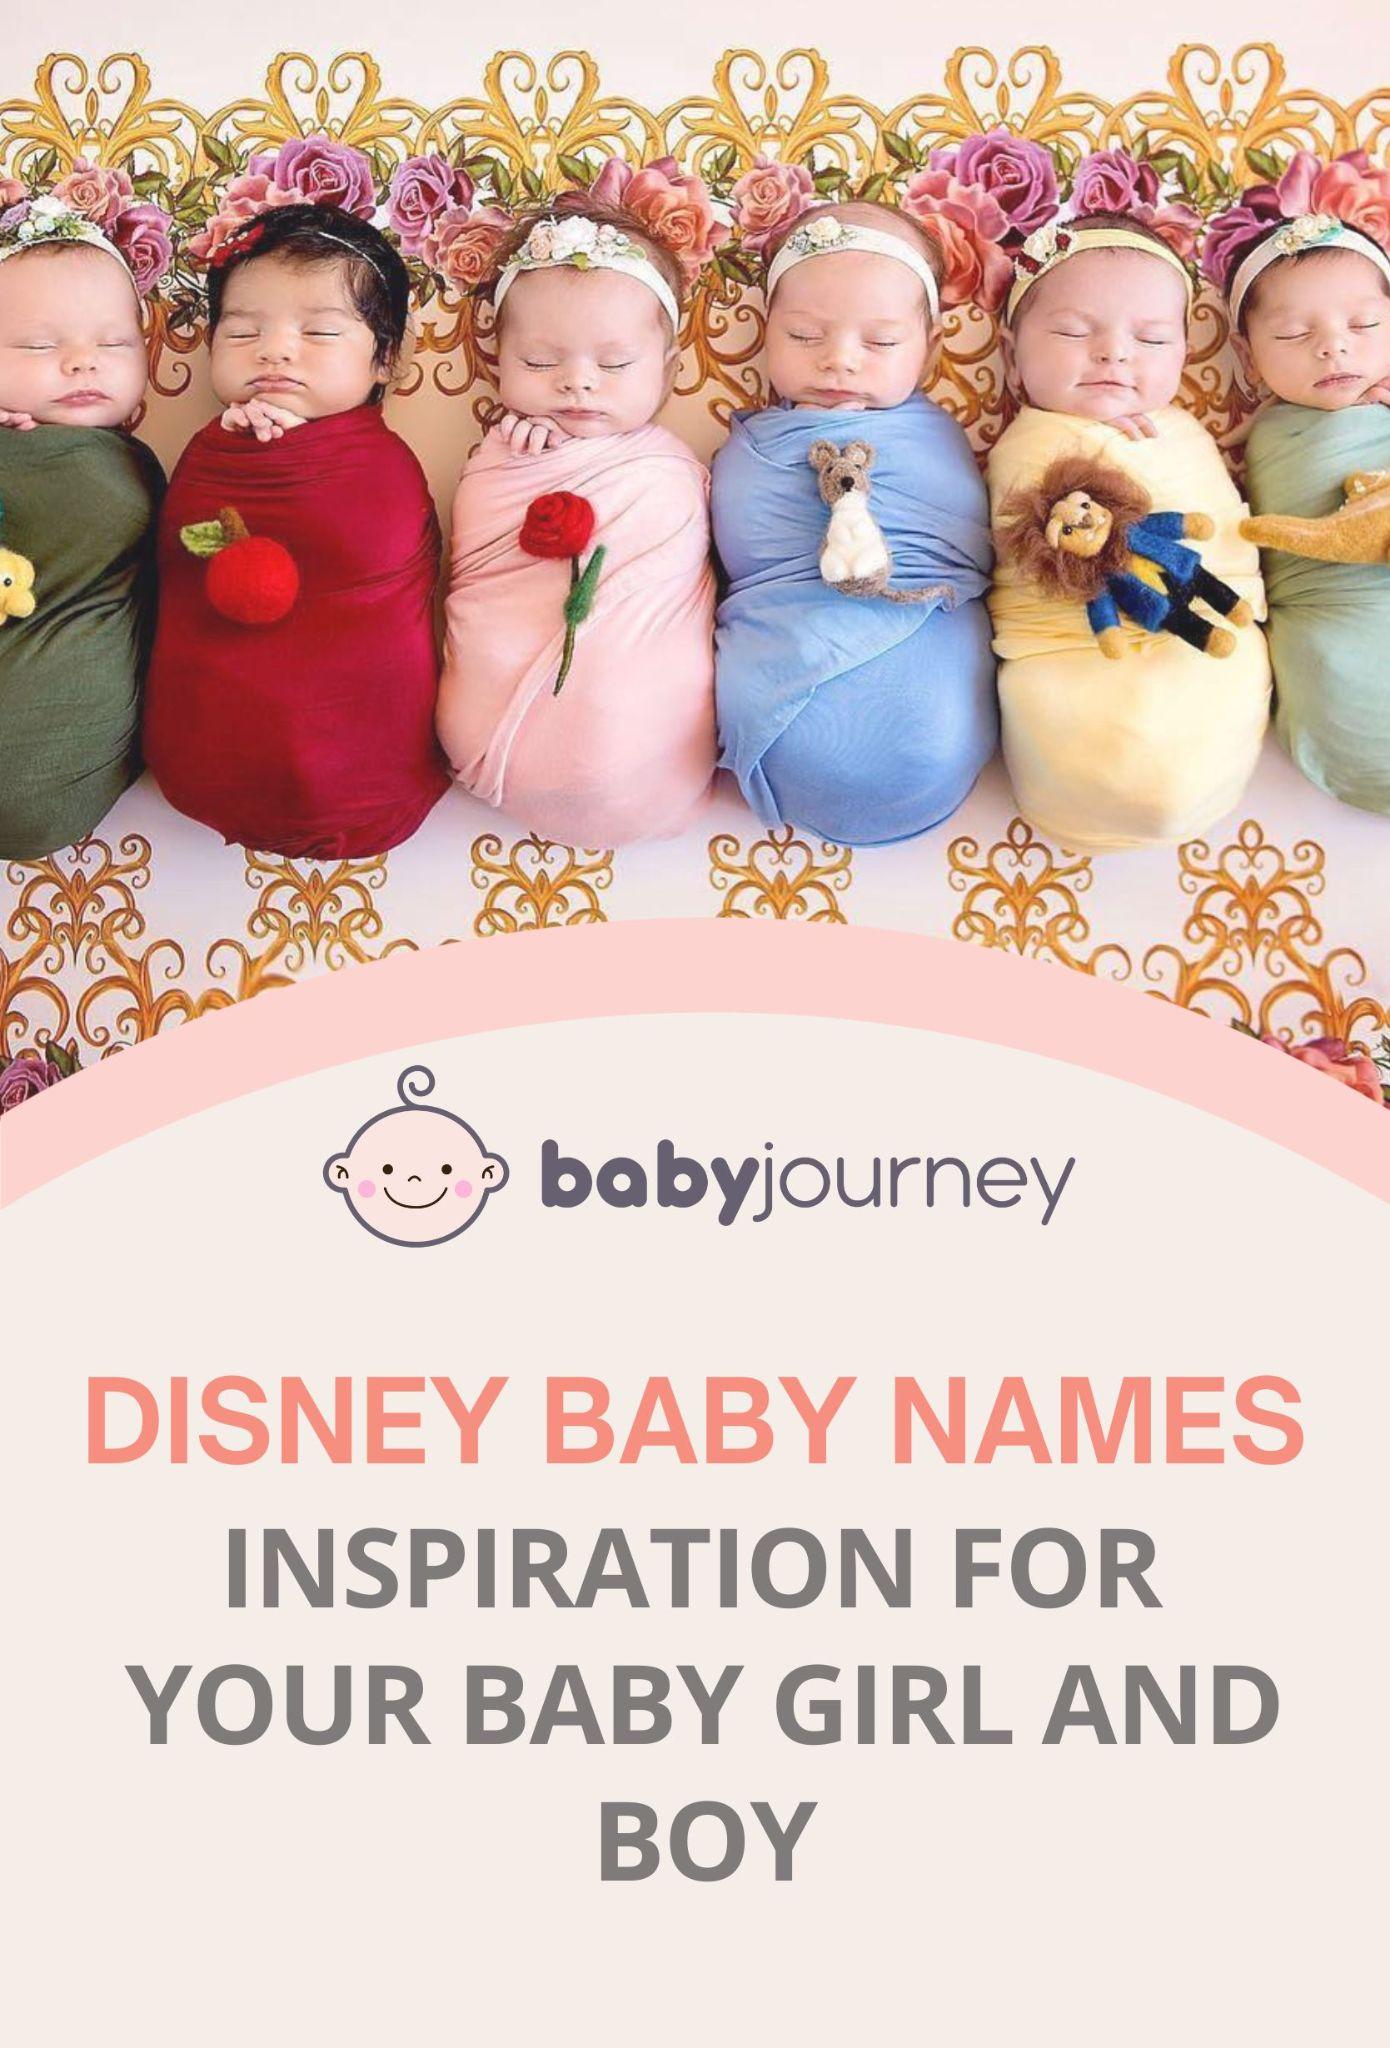 Disney Baby Names Inspiration For Your Baby Girl and Boy pinterest - Baby Journey